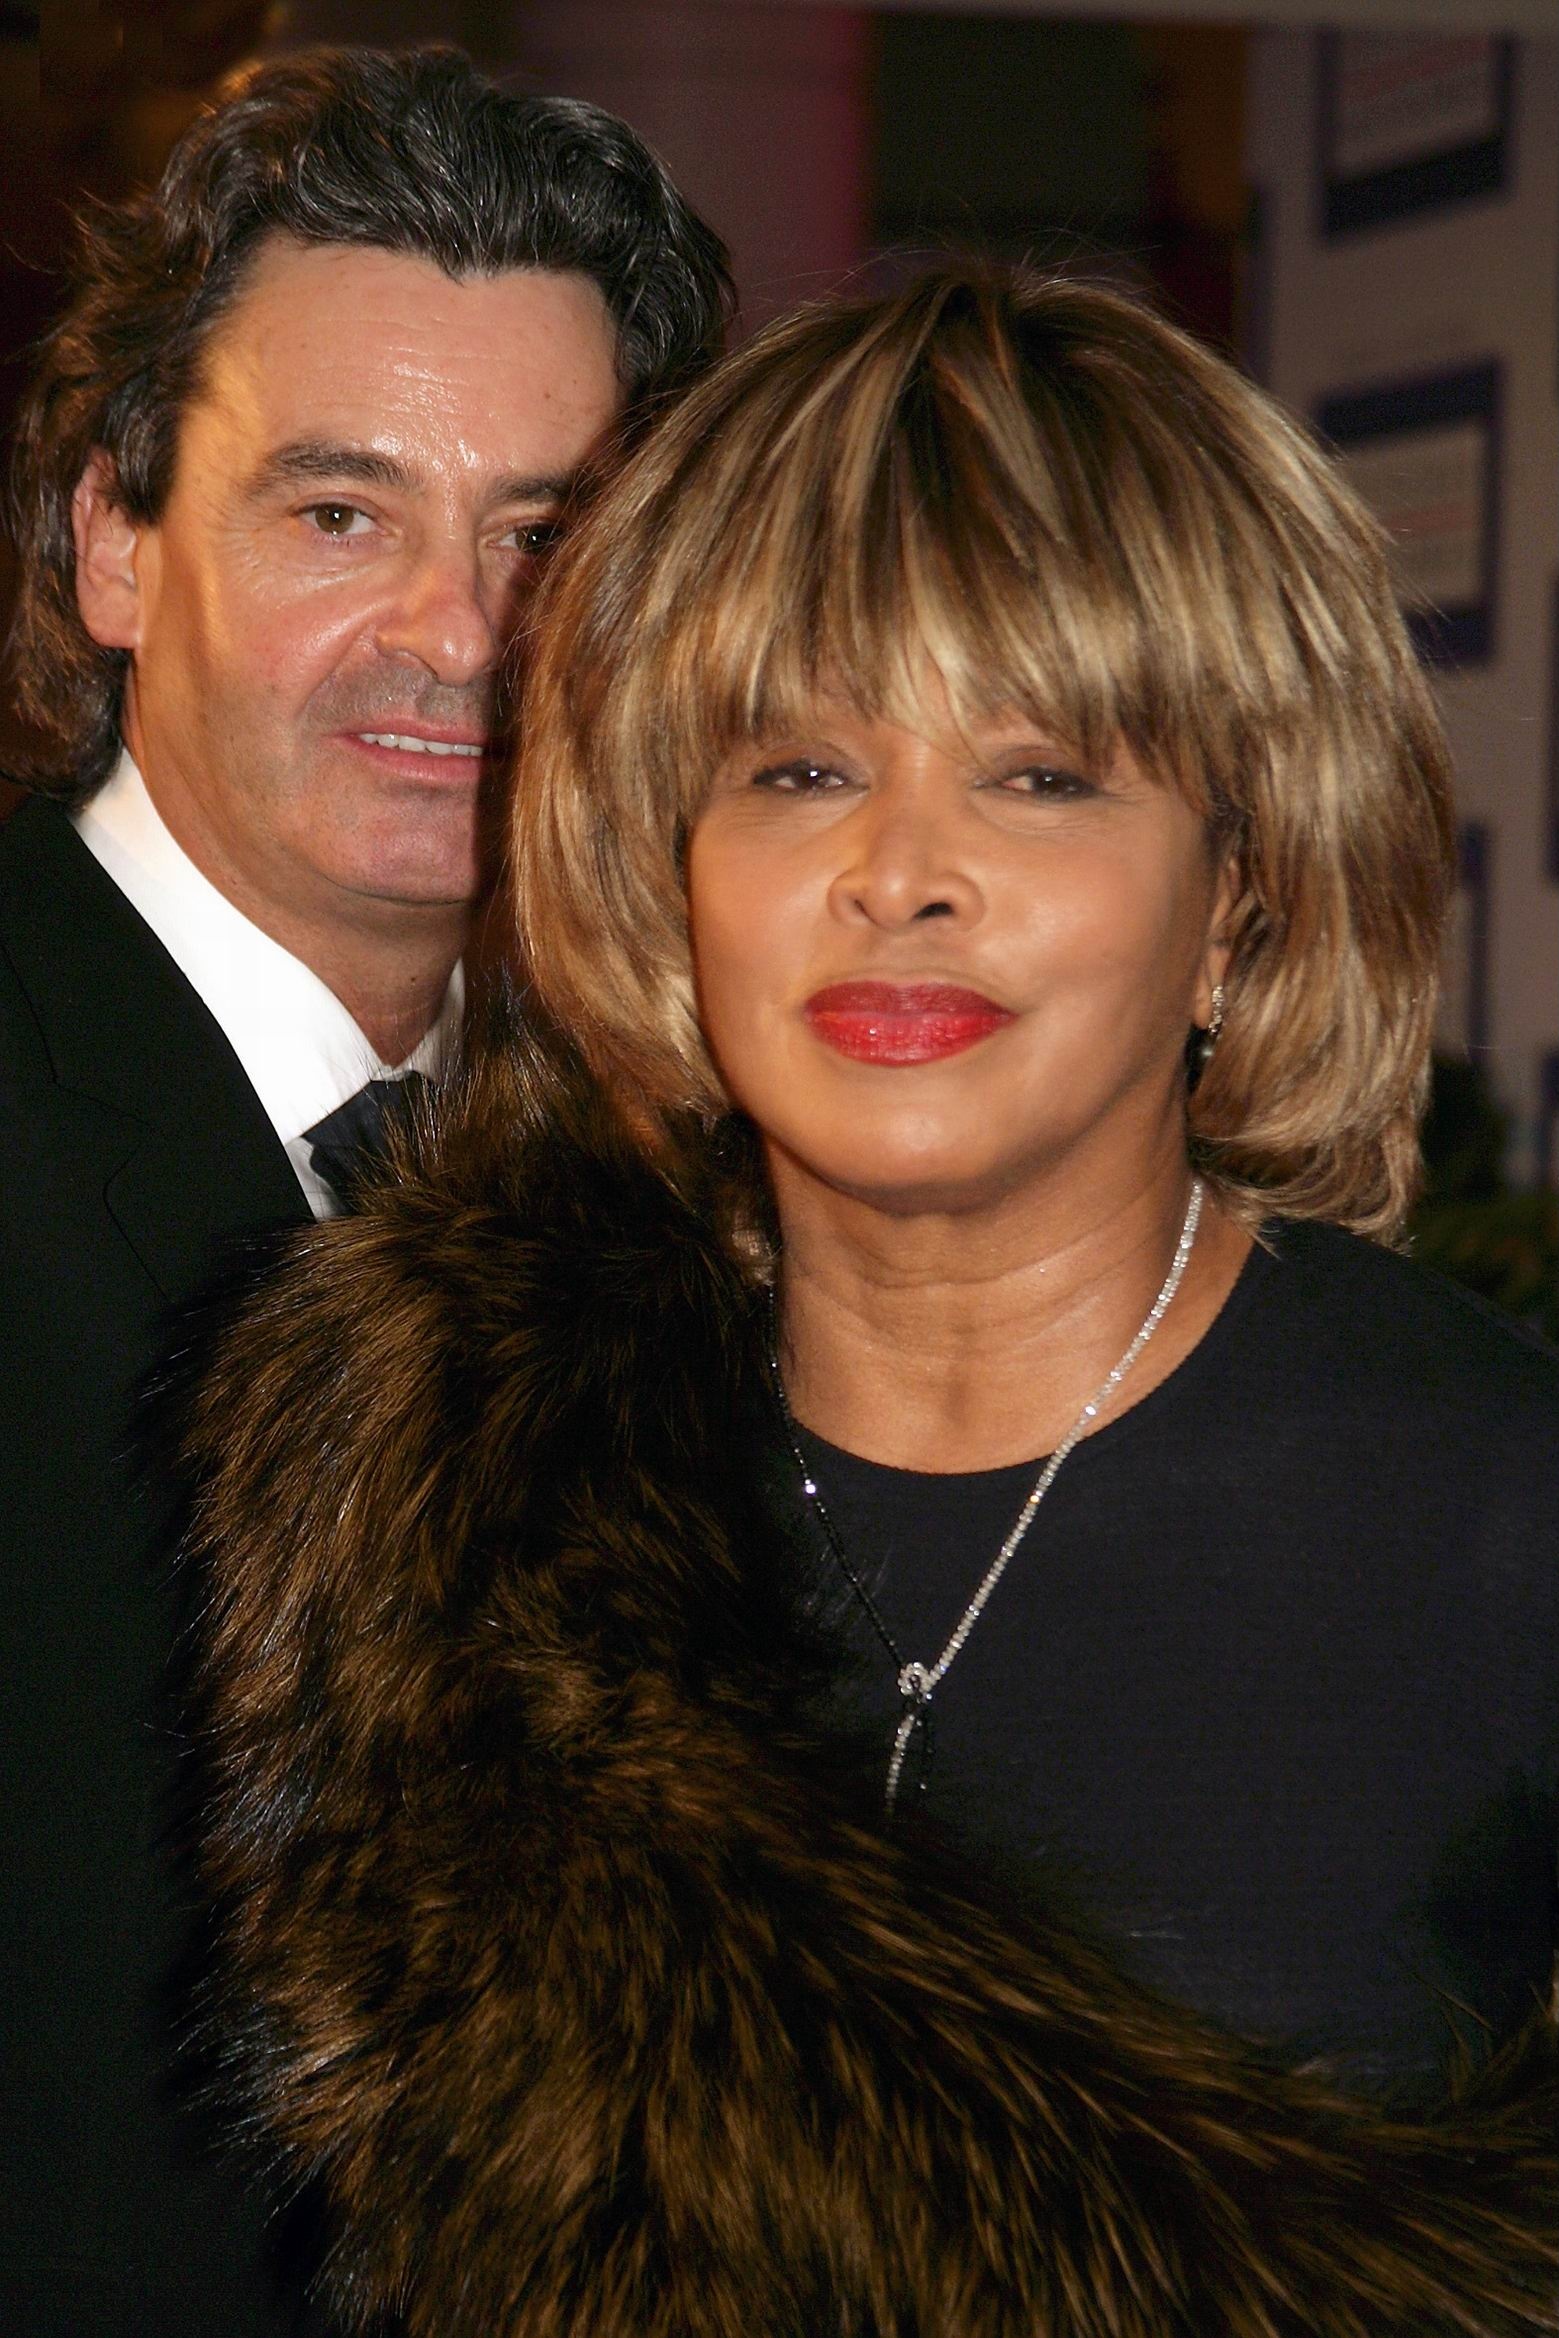 Tina Turner and Erwin Bach at an awards event on February 13, 2005 | Source: Getty Images